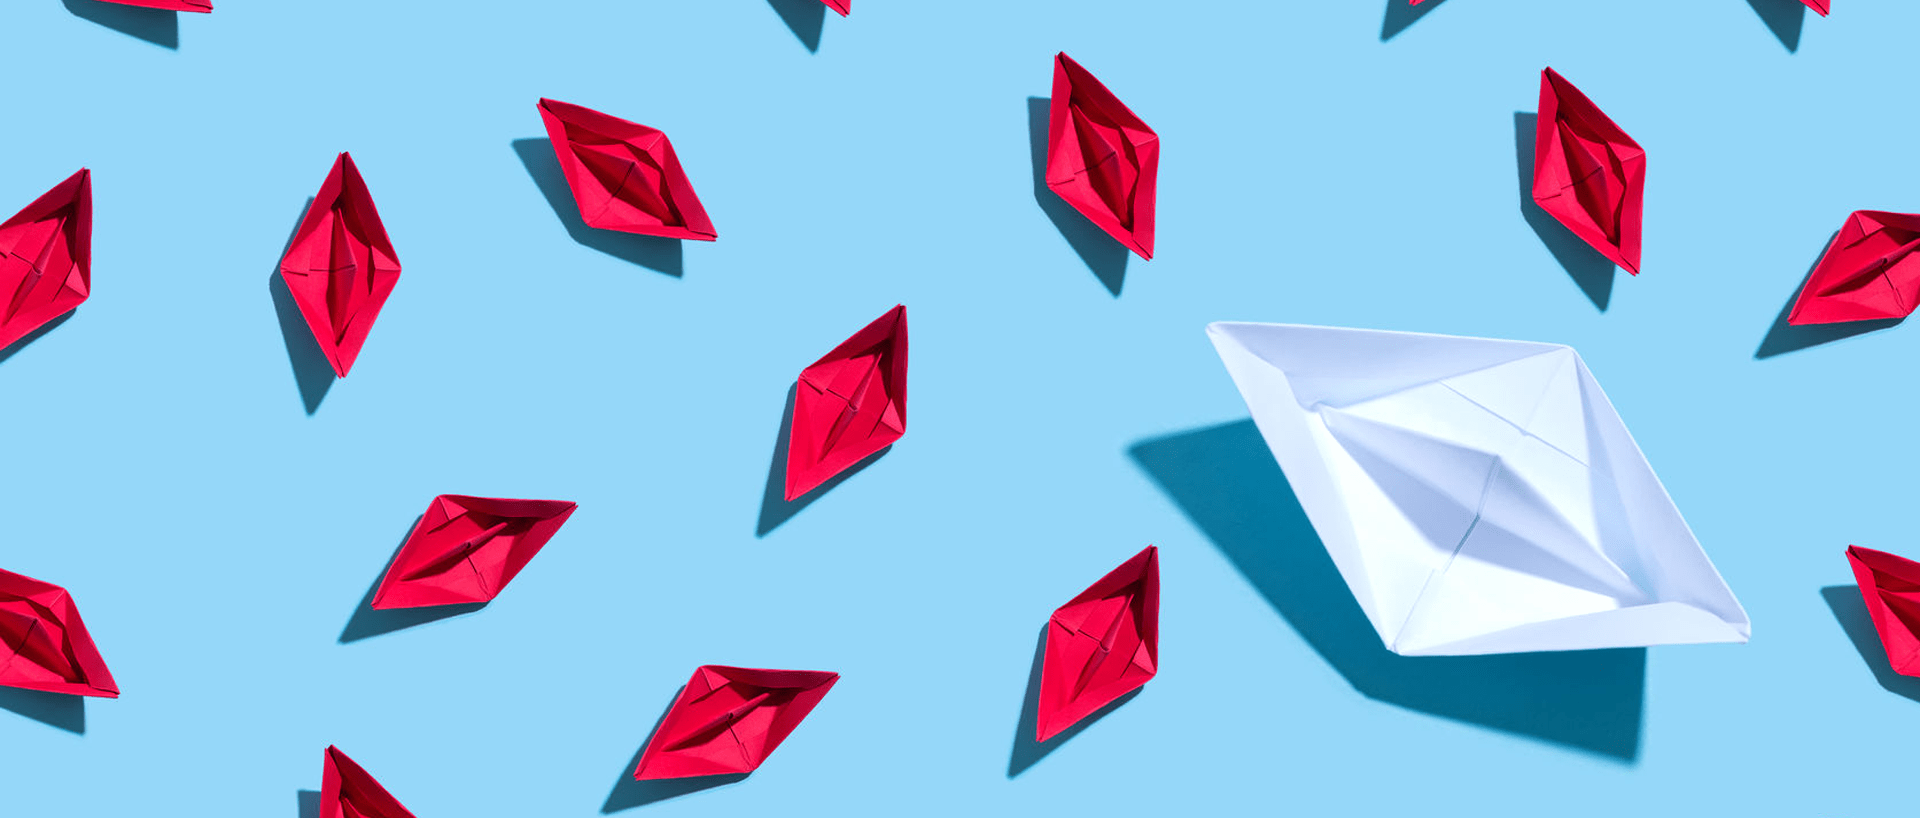 A large white paper boat stands out amongst identical tiny red boats.